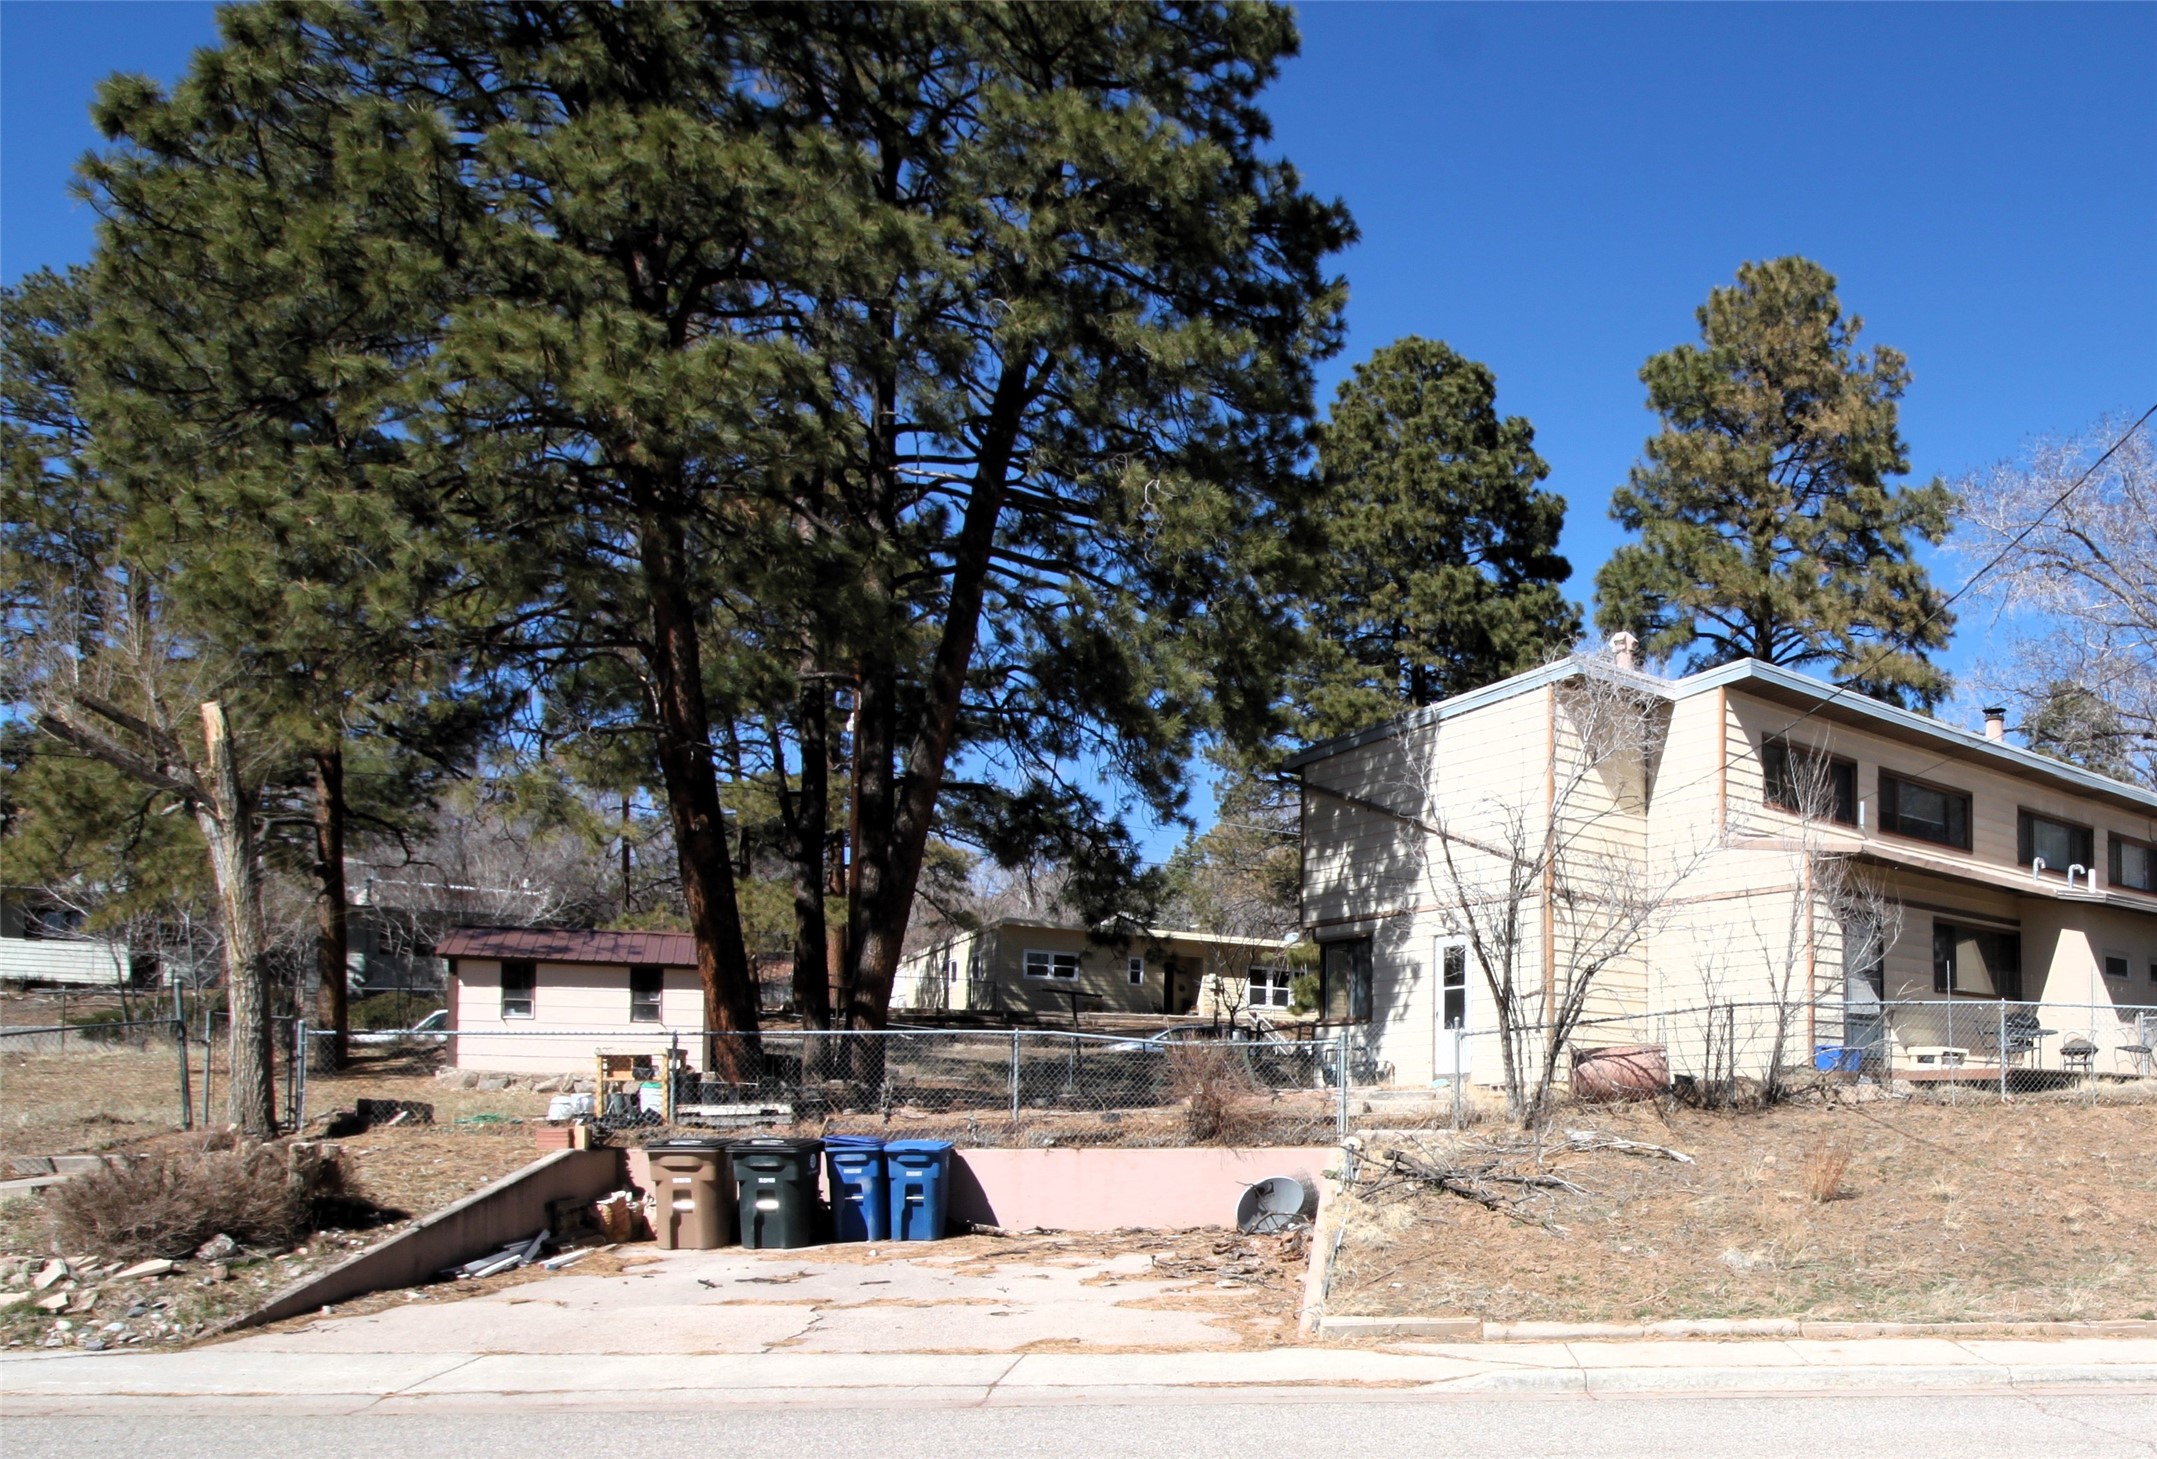 3964 Sycamore Street B, Los Alamos, New Mexico 87544, 3 Bedrooms Bedrooms, ,2 BathroomsBathrooms,Residential,For Sale,3964 Sycamore Street B,202401013